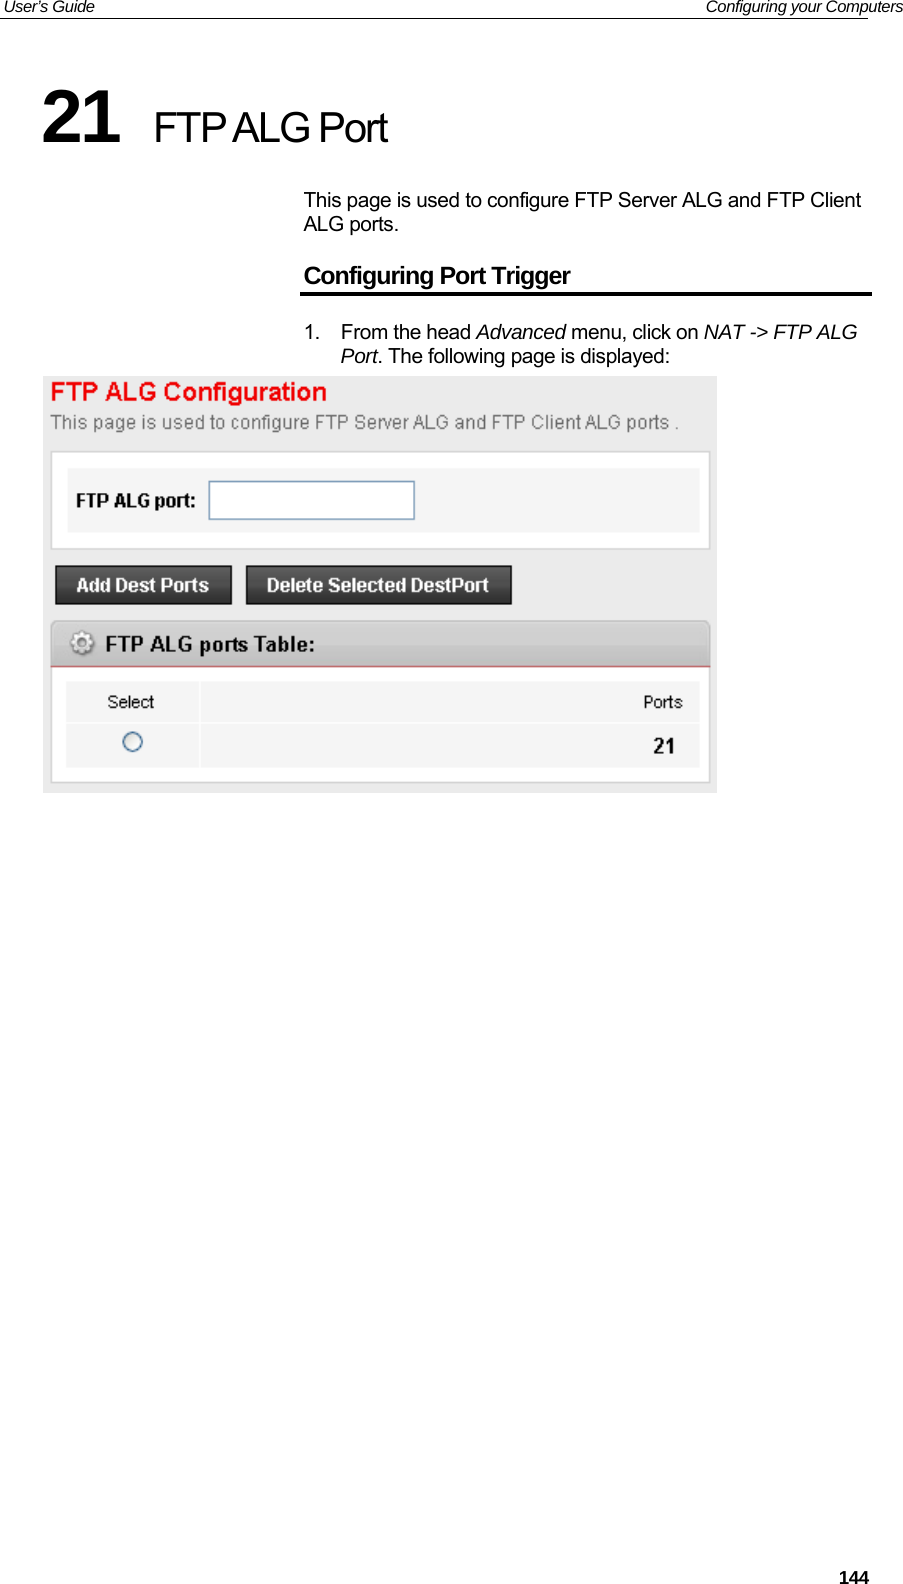 User’s Guide   Configuring your Computers  14421  FTP ALG Port This page is used to configure FTP Server ALG and FTP Client ALG ports. Configuring Port Trigger 1. From the head Advanced menu, click on NAT -&gt; FTP ALG Port. The following page is displayed:                     